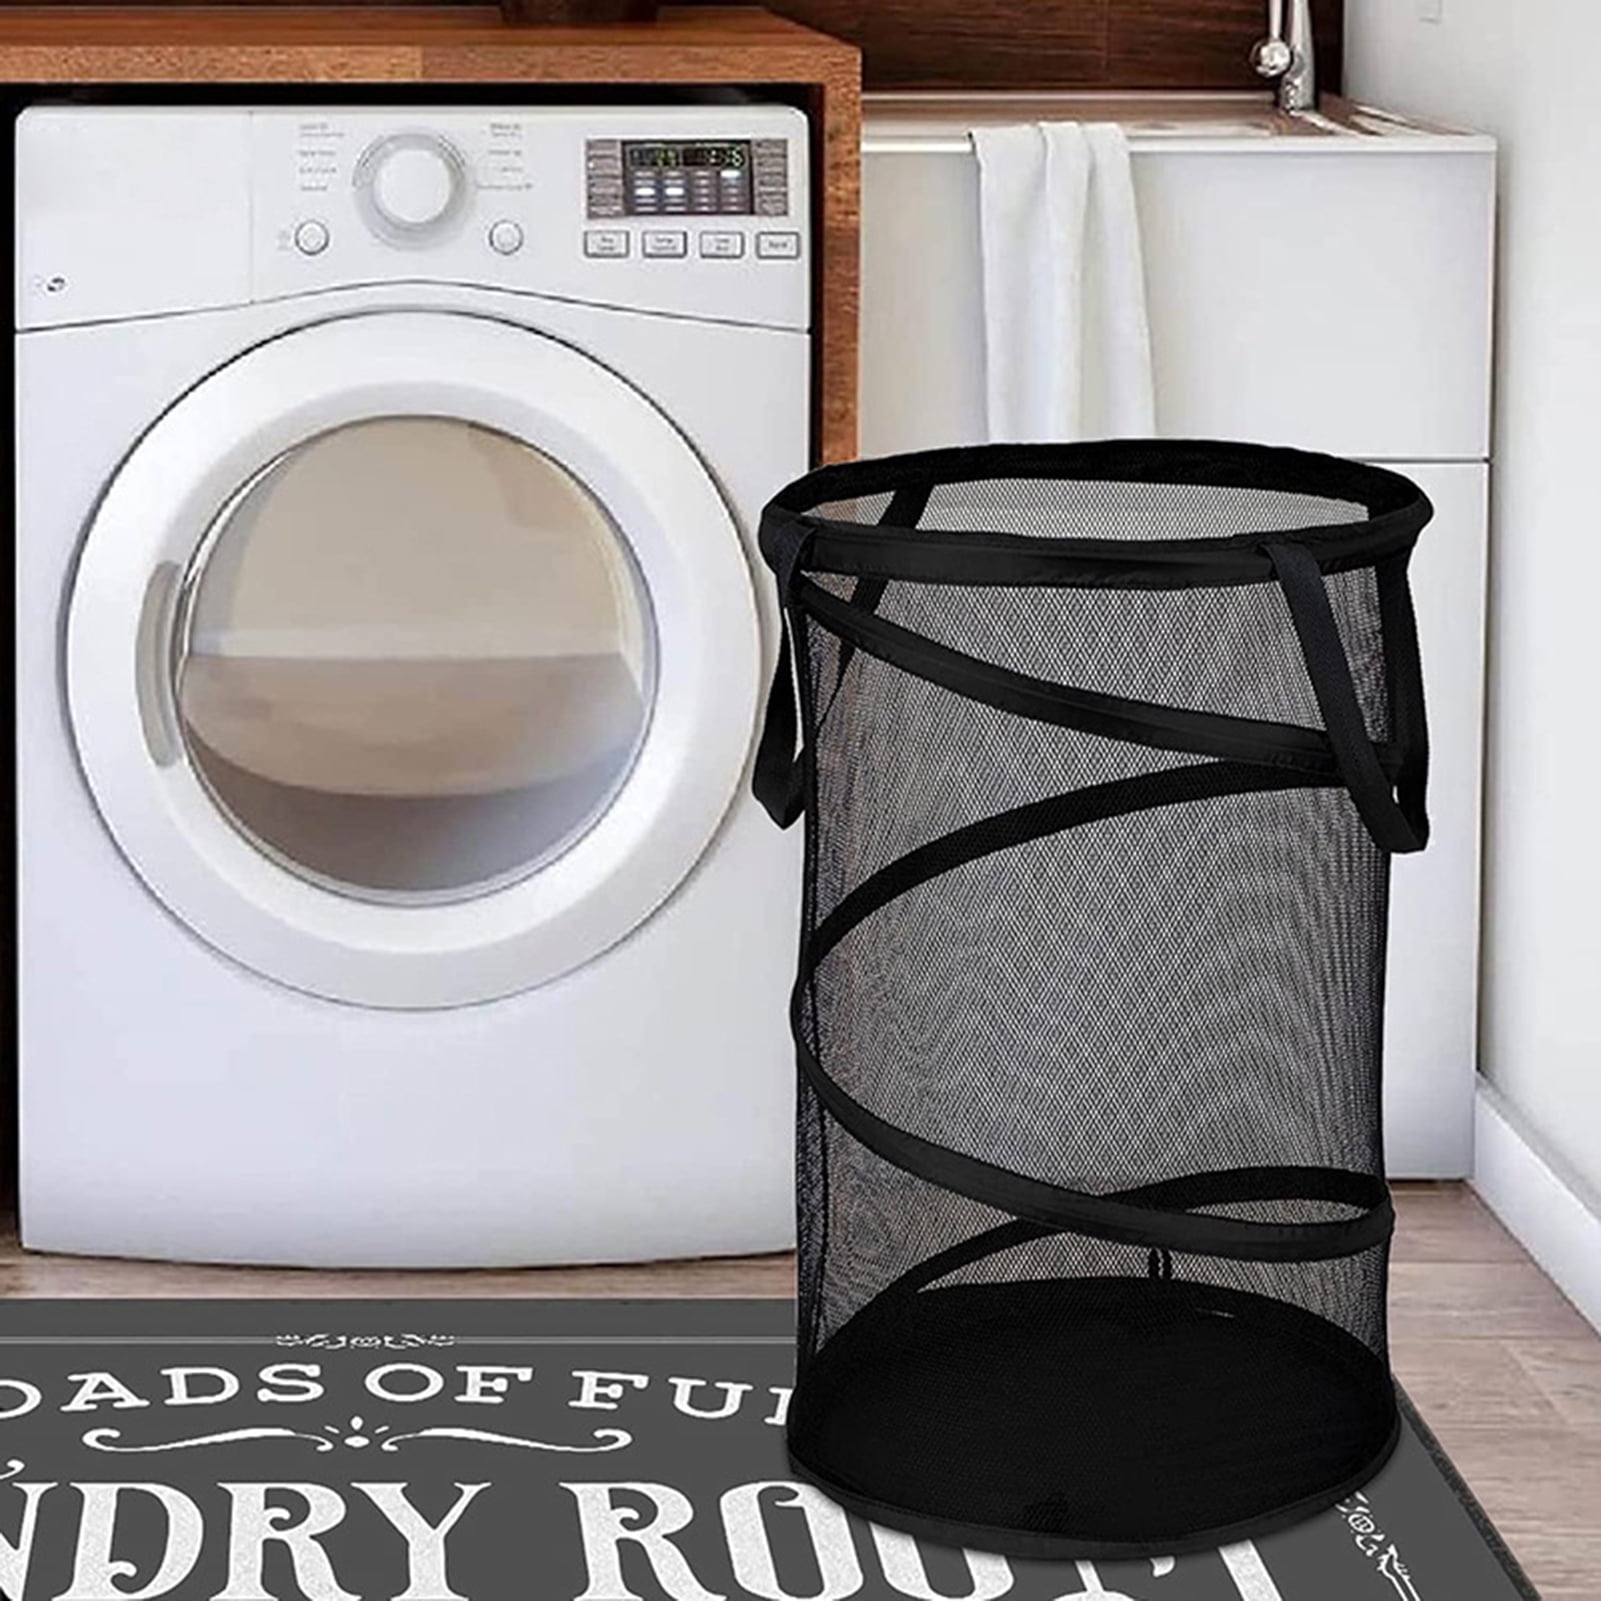  Neateam Laundry Hamper, 65L Collapsible Laundry Basket with  Lid, Grey Hampers for Laundry Bin with Handle Laundry Basket Dorm with Laundry  Bag, Dirty Clothes Hampers for Bedroom Laundry Room Bathroom 